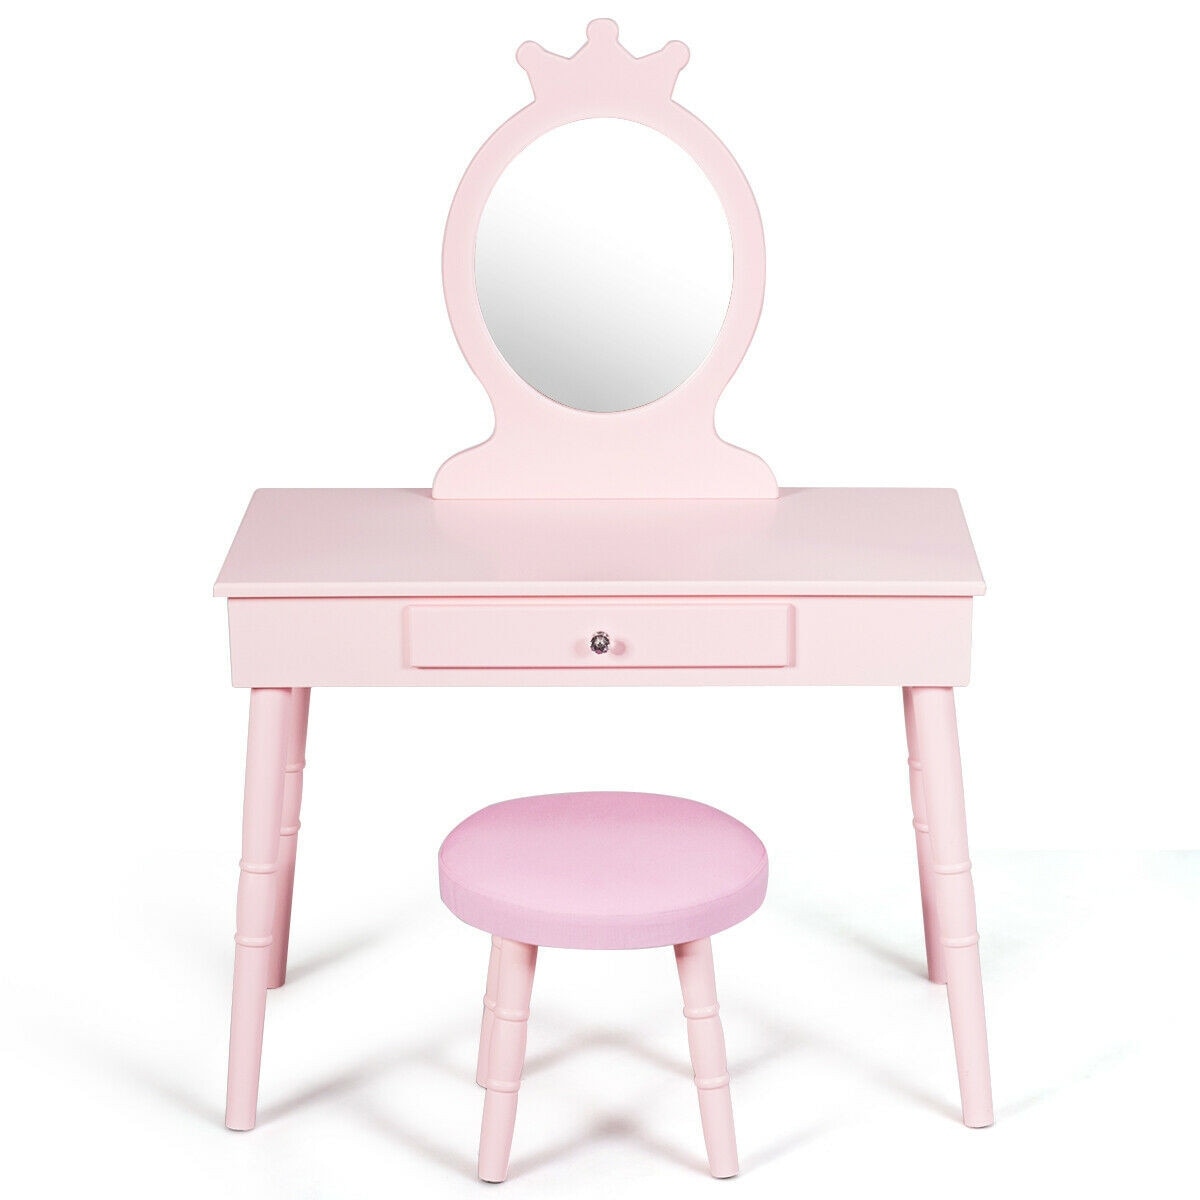 childrens wooden dressing table